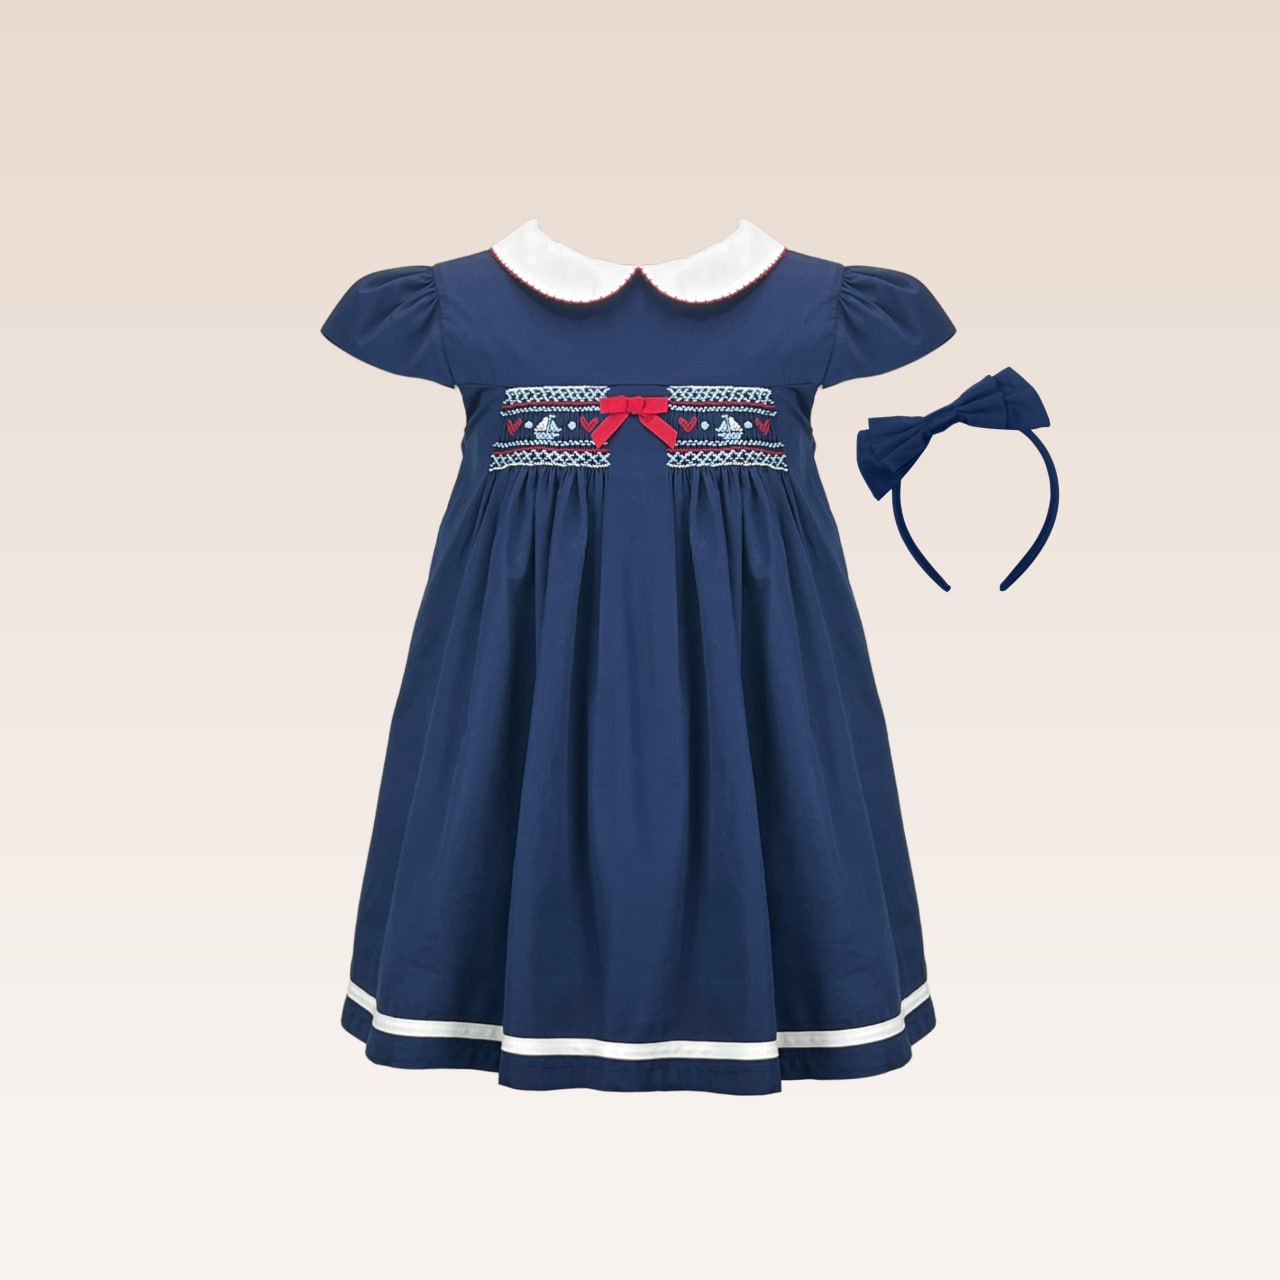 Inaya Girls Navy Blue Collared Dress with Hand Smocked Design Front with Headband